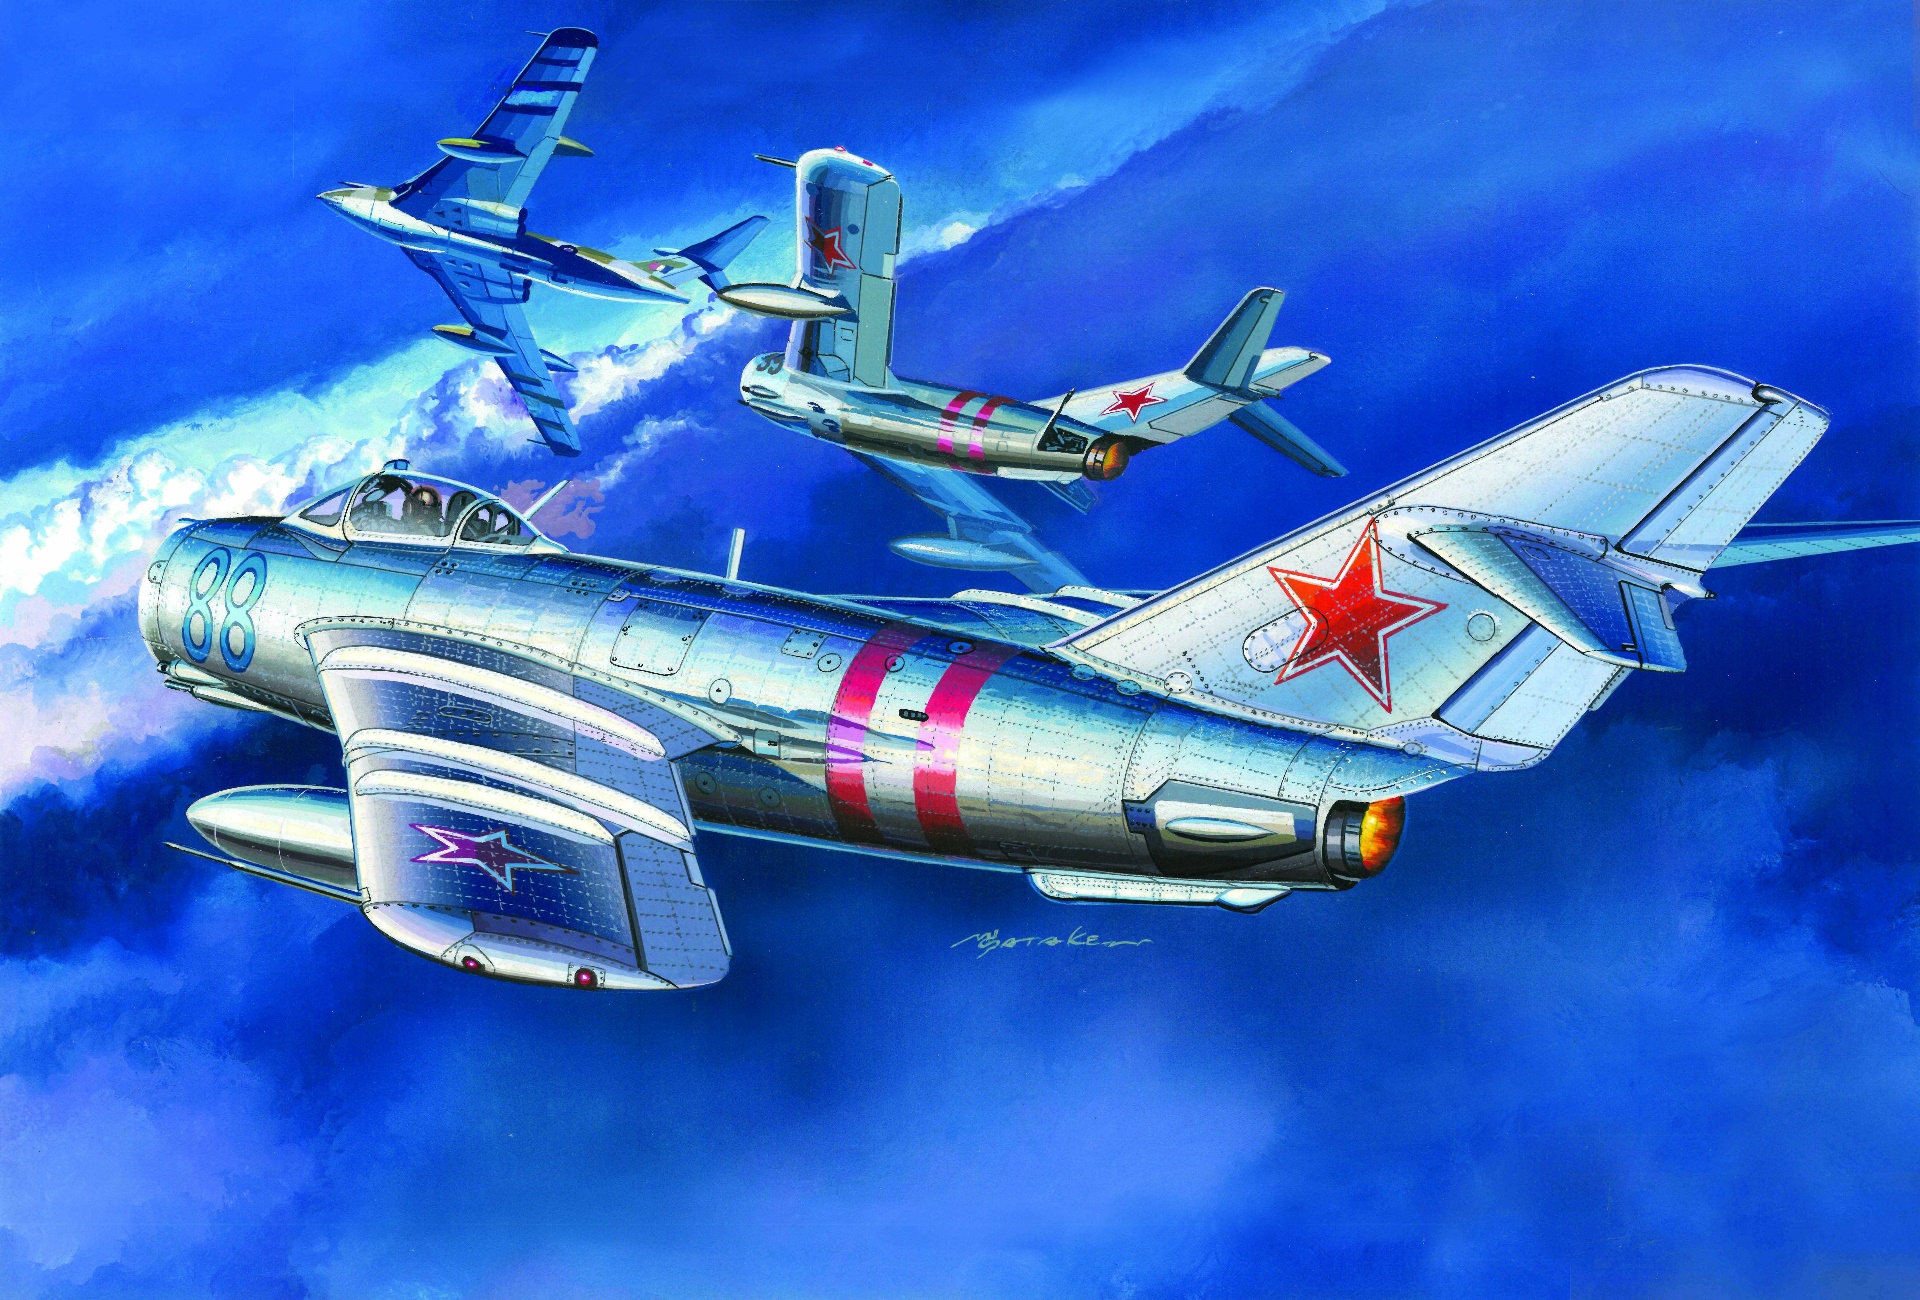 General 1920x1300 aircraft military military vehicle vehicle military aircraft artwork MiG 17 Masao Satake signature Boxart jet fighter flying clouds Soviet Air Forces